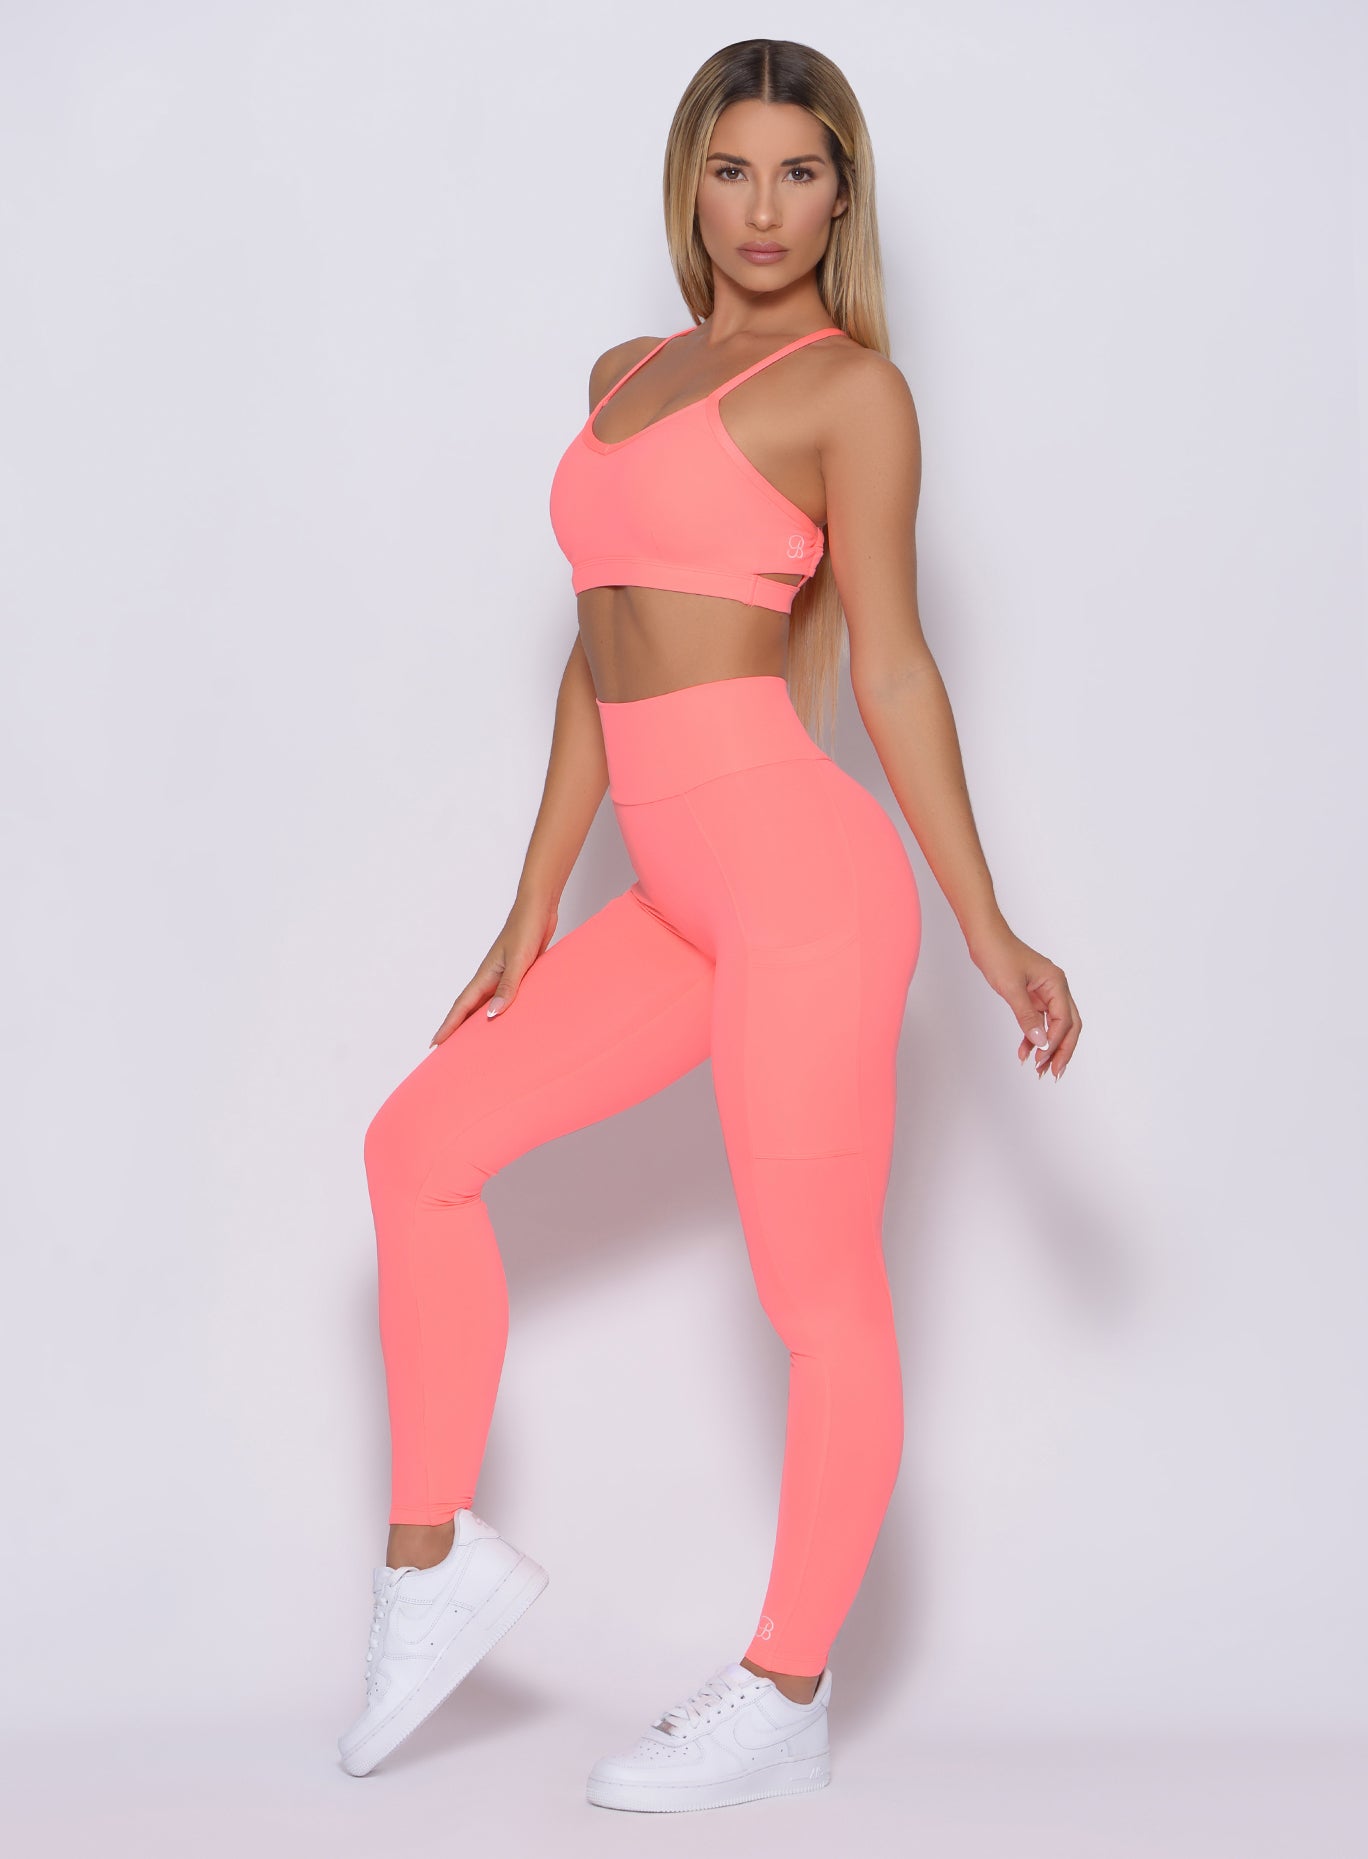 Left side view of the model angled left wearing our curves leggings in wild peach color and a matching bra